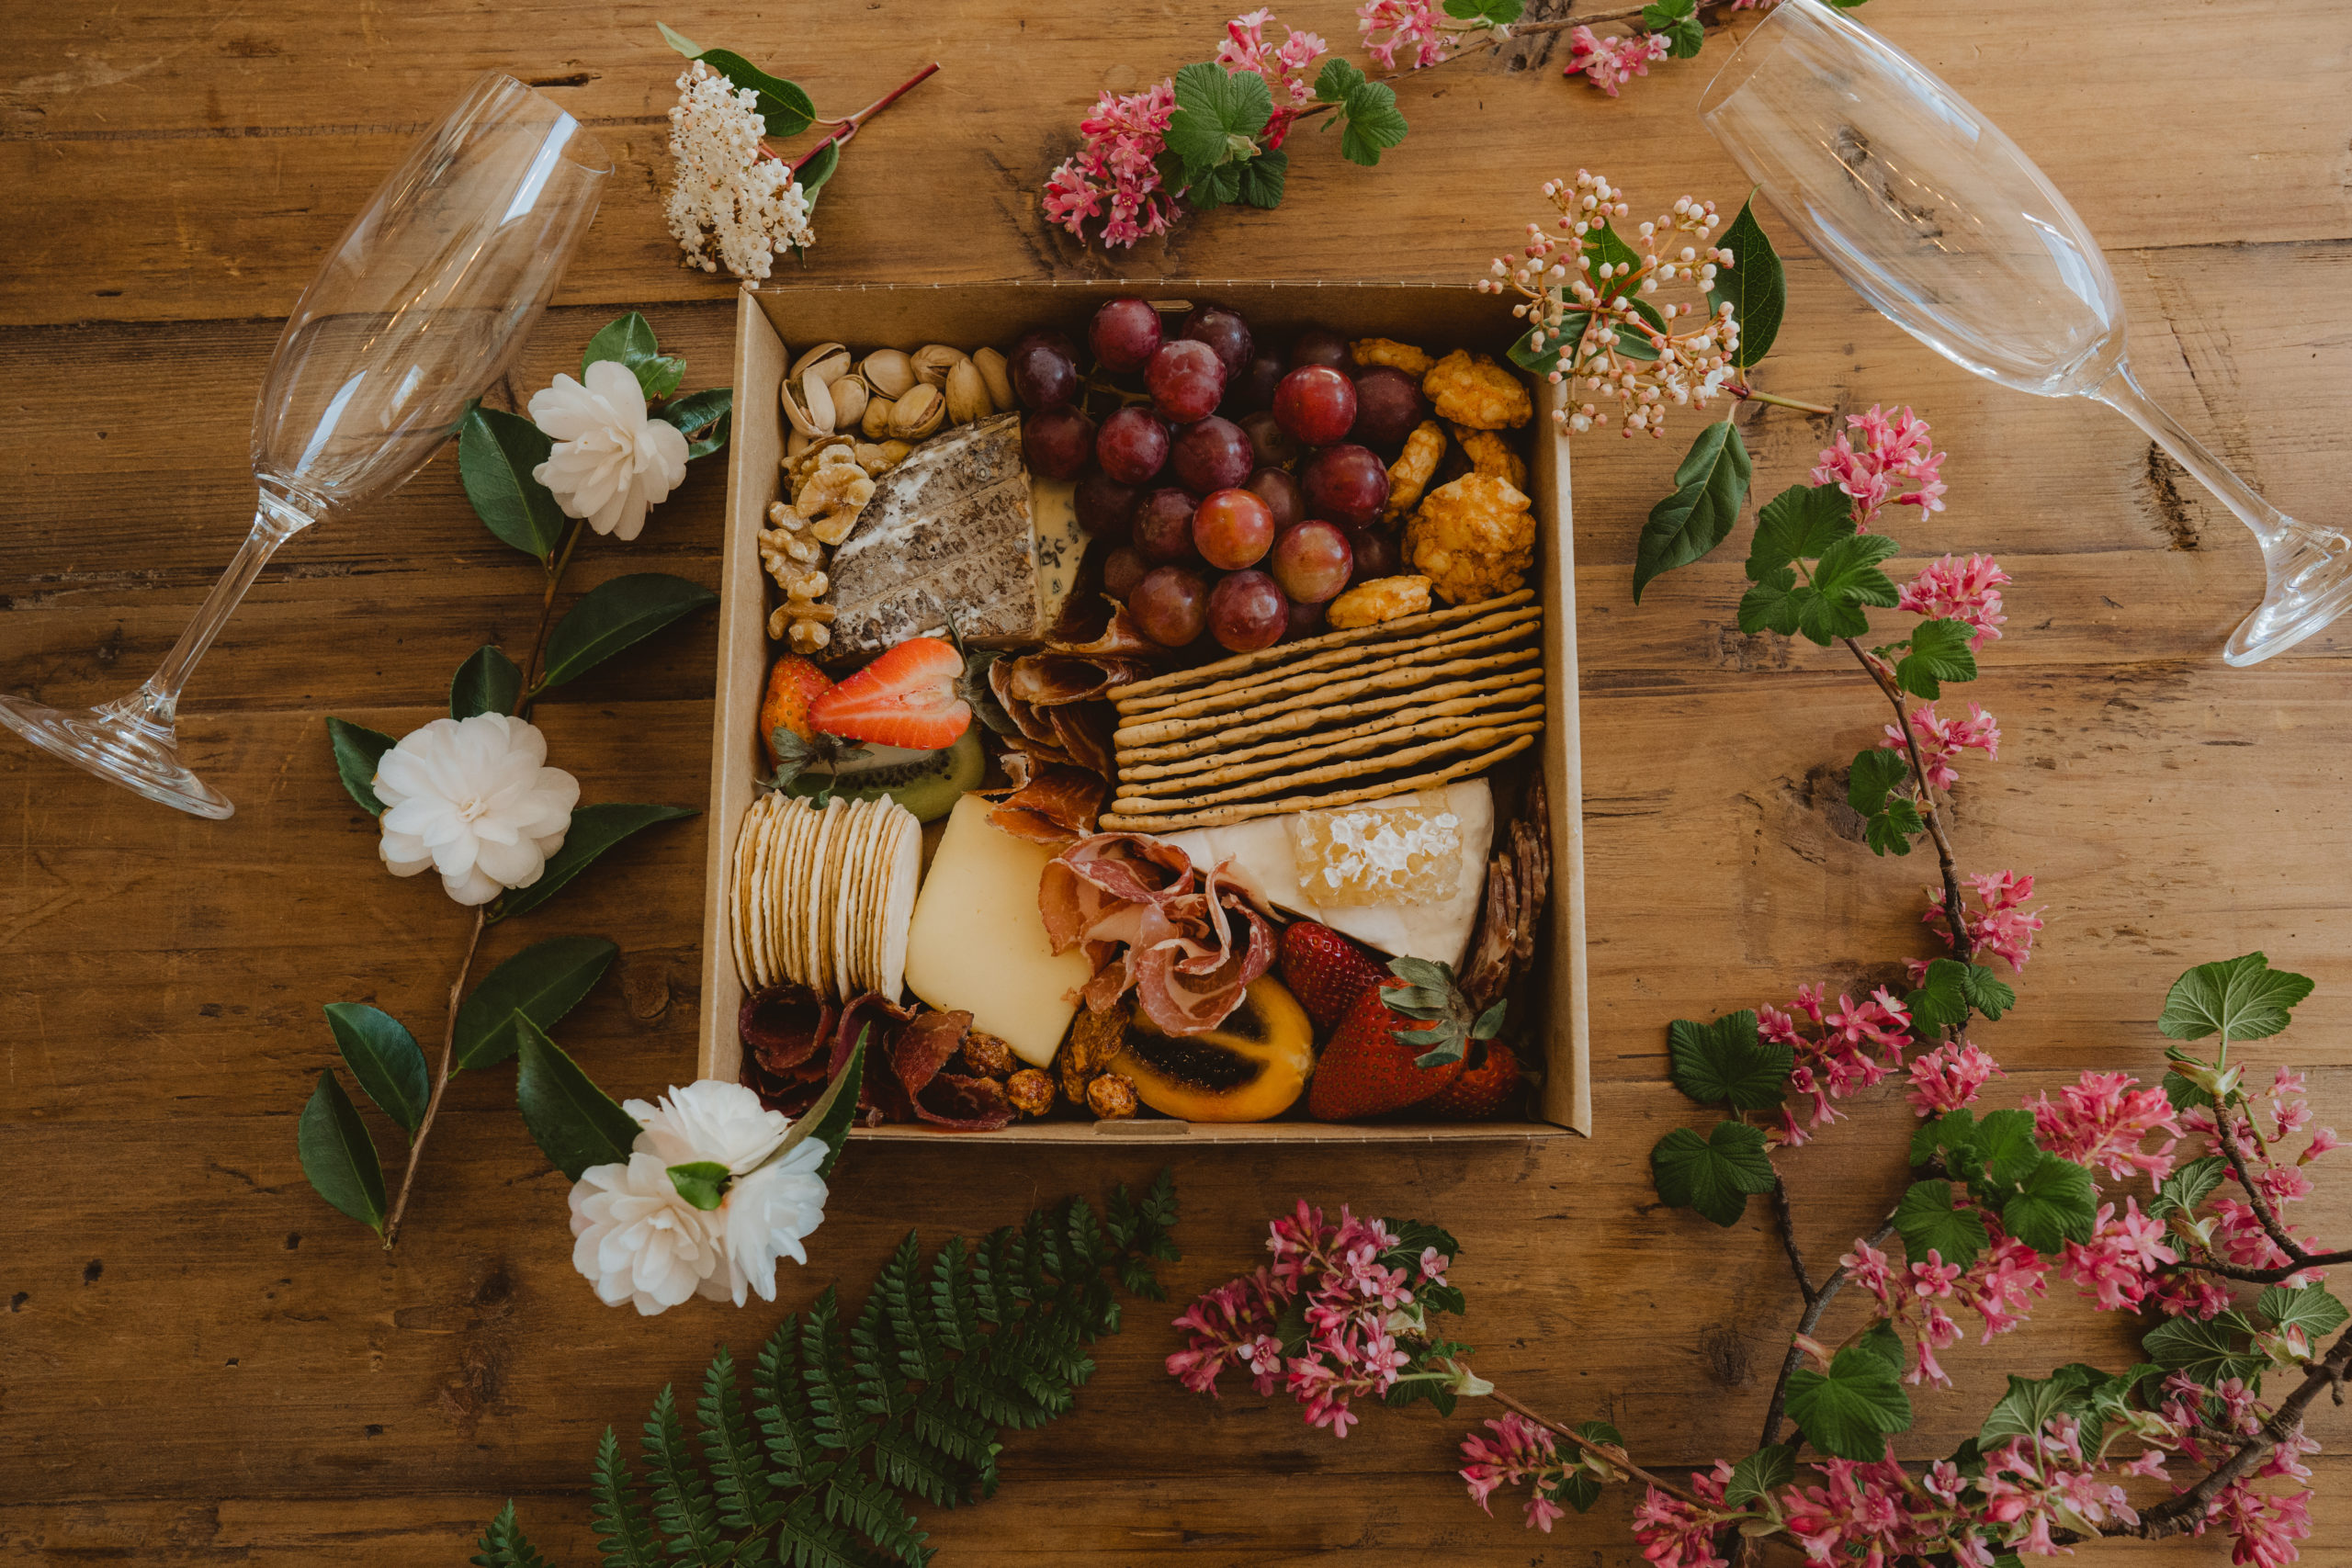 Picnic box for Queenstown wedding couple in New Zealand